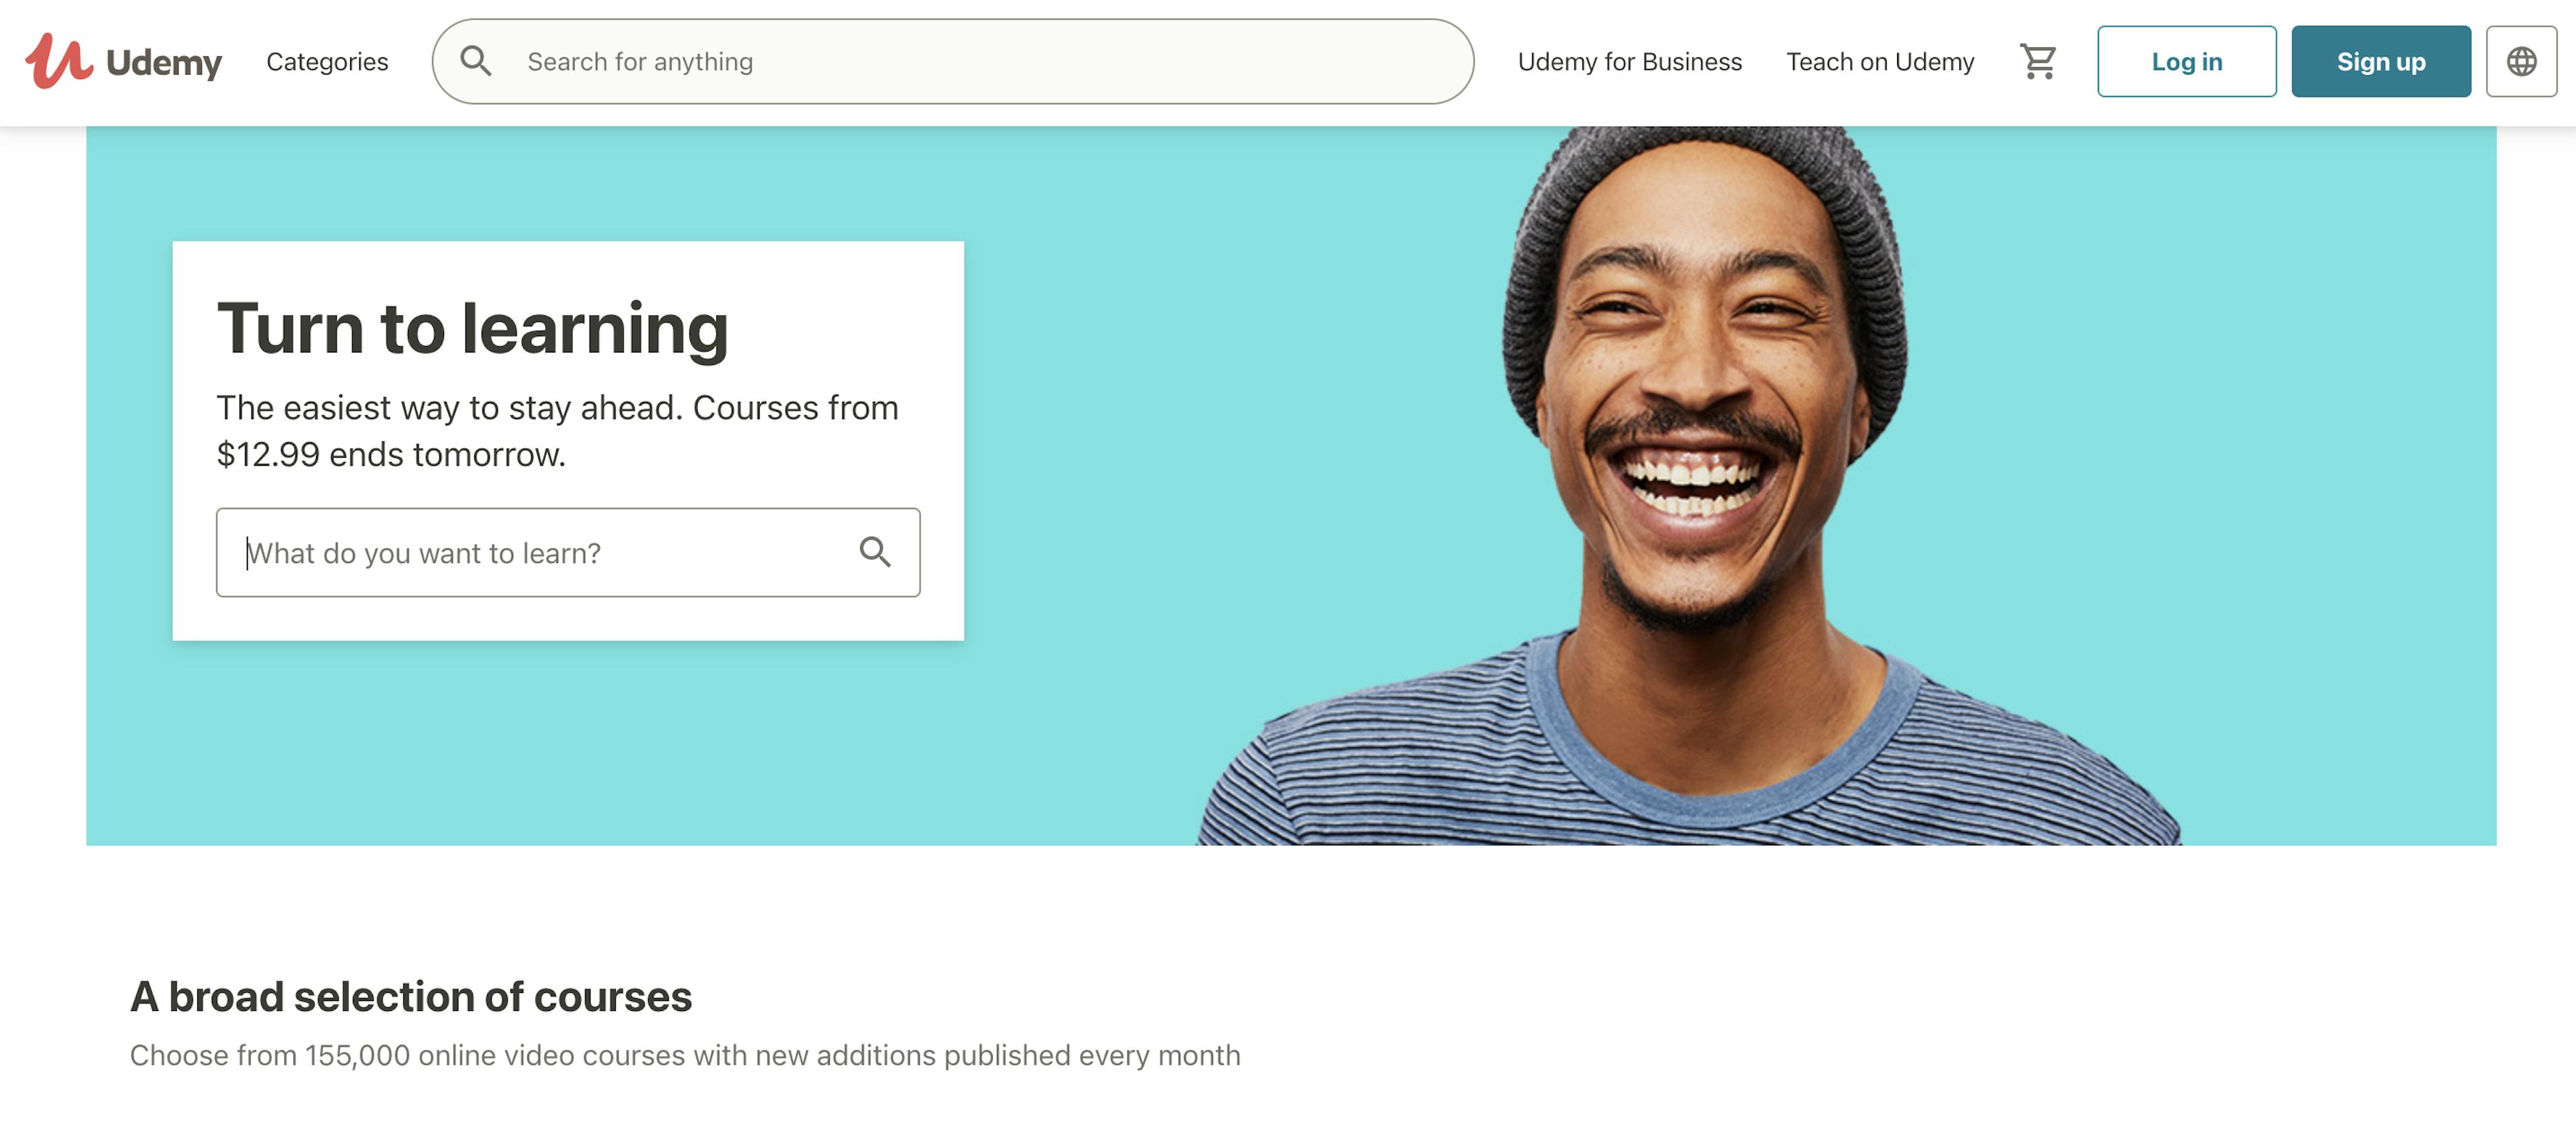 Udemy homepage welcomes with a search recommendation feature. Image: Udemy